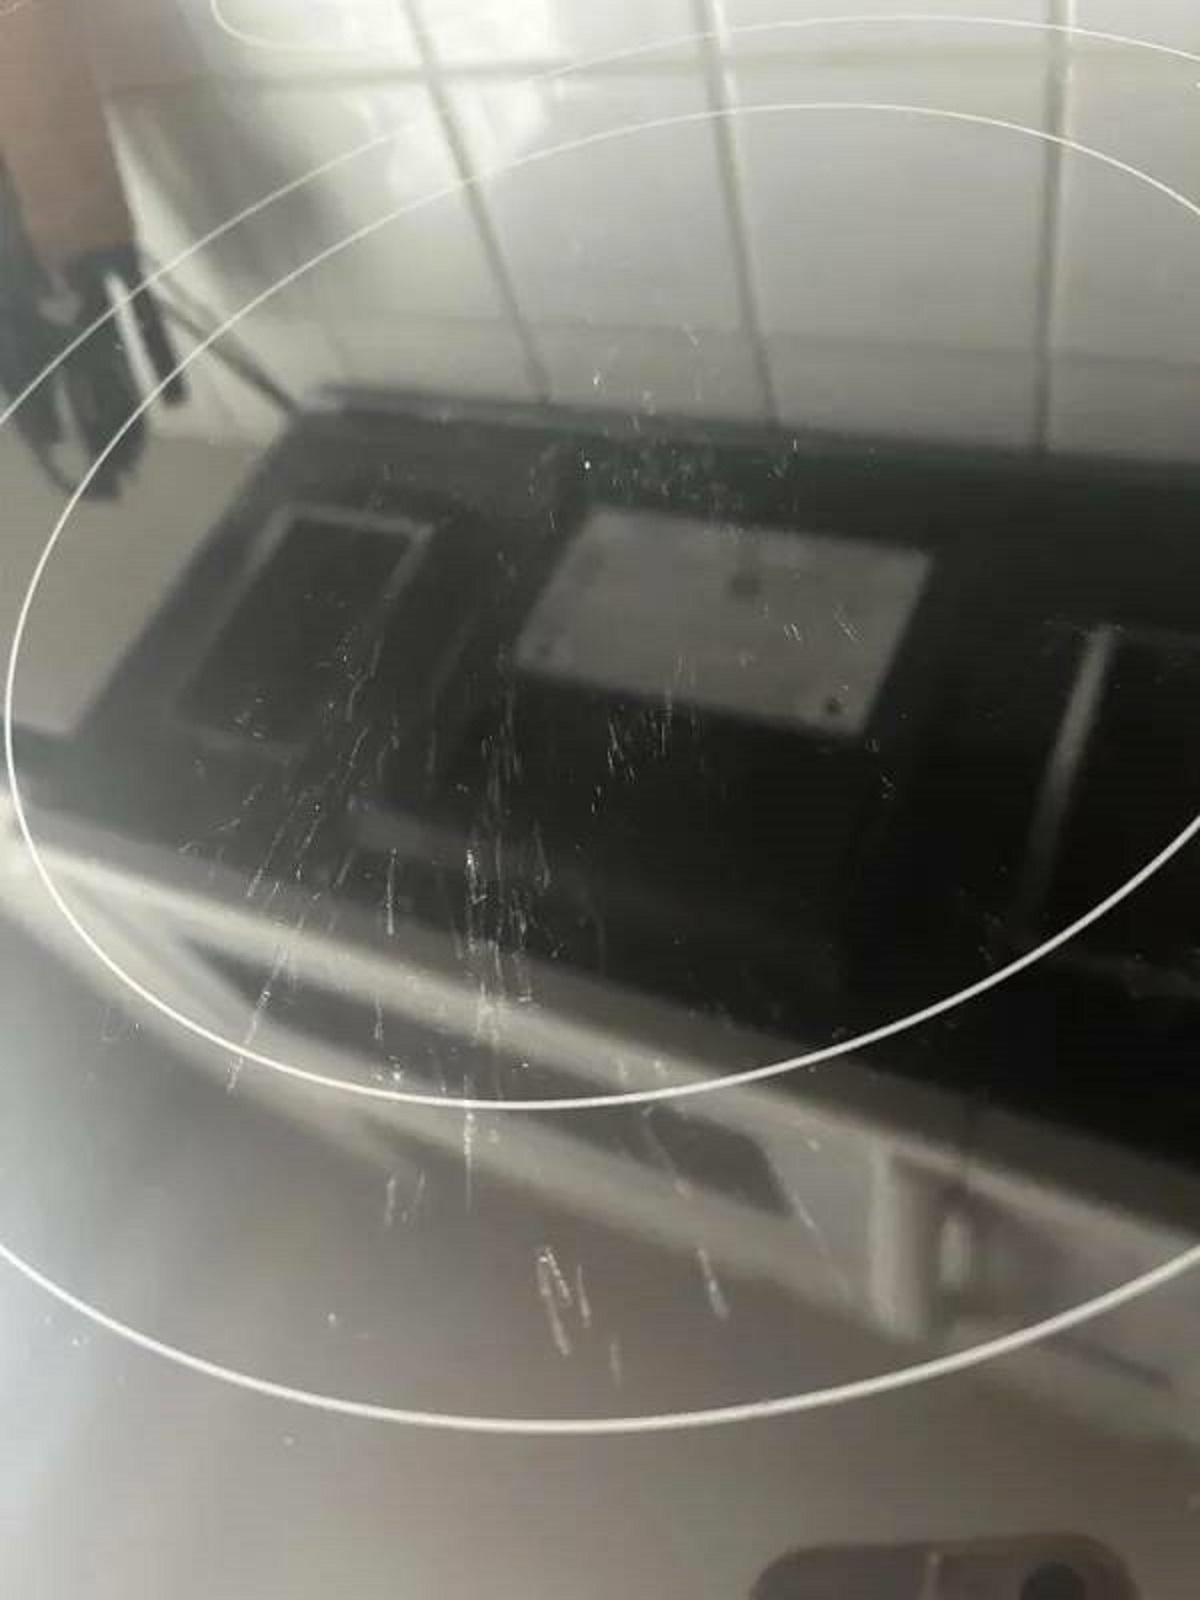 “My fiancé scratched the hell out of our glass stove top. We have had it for 6 days.”